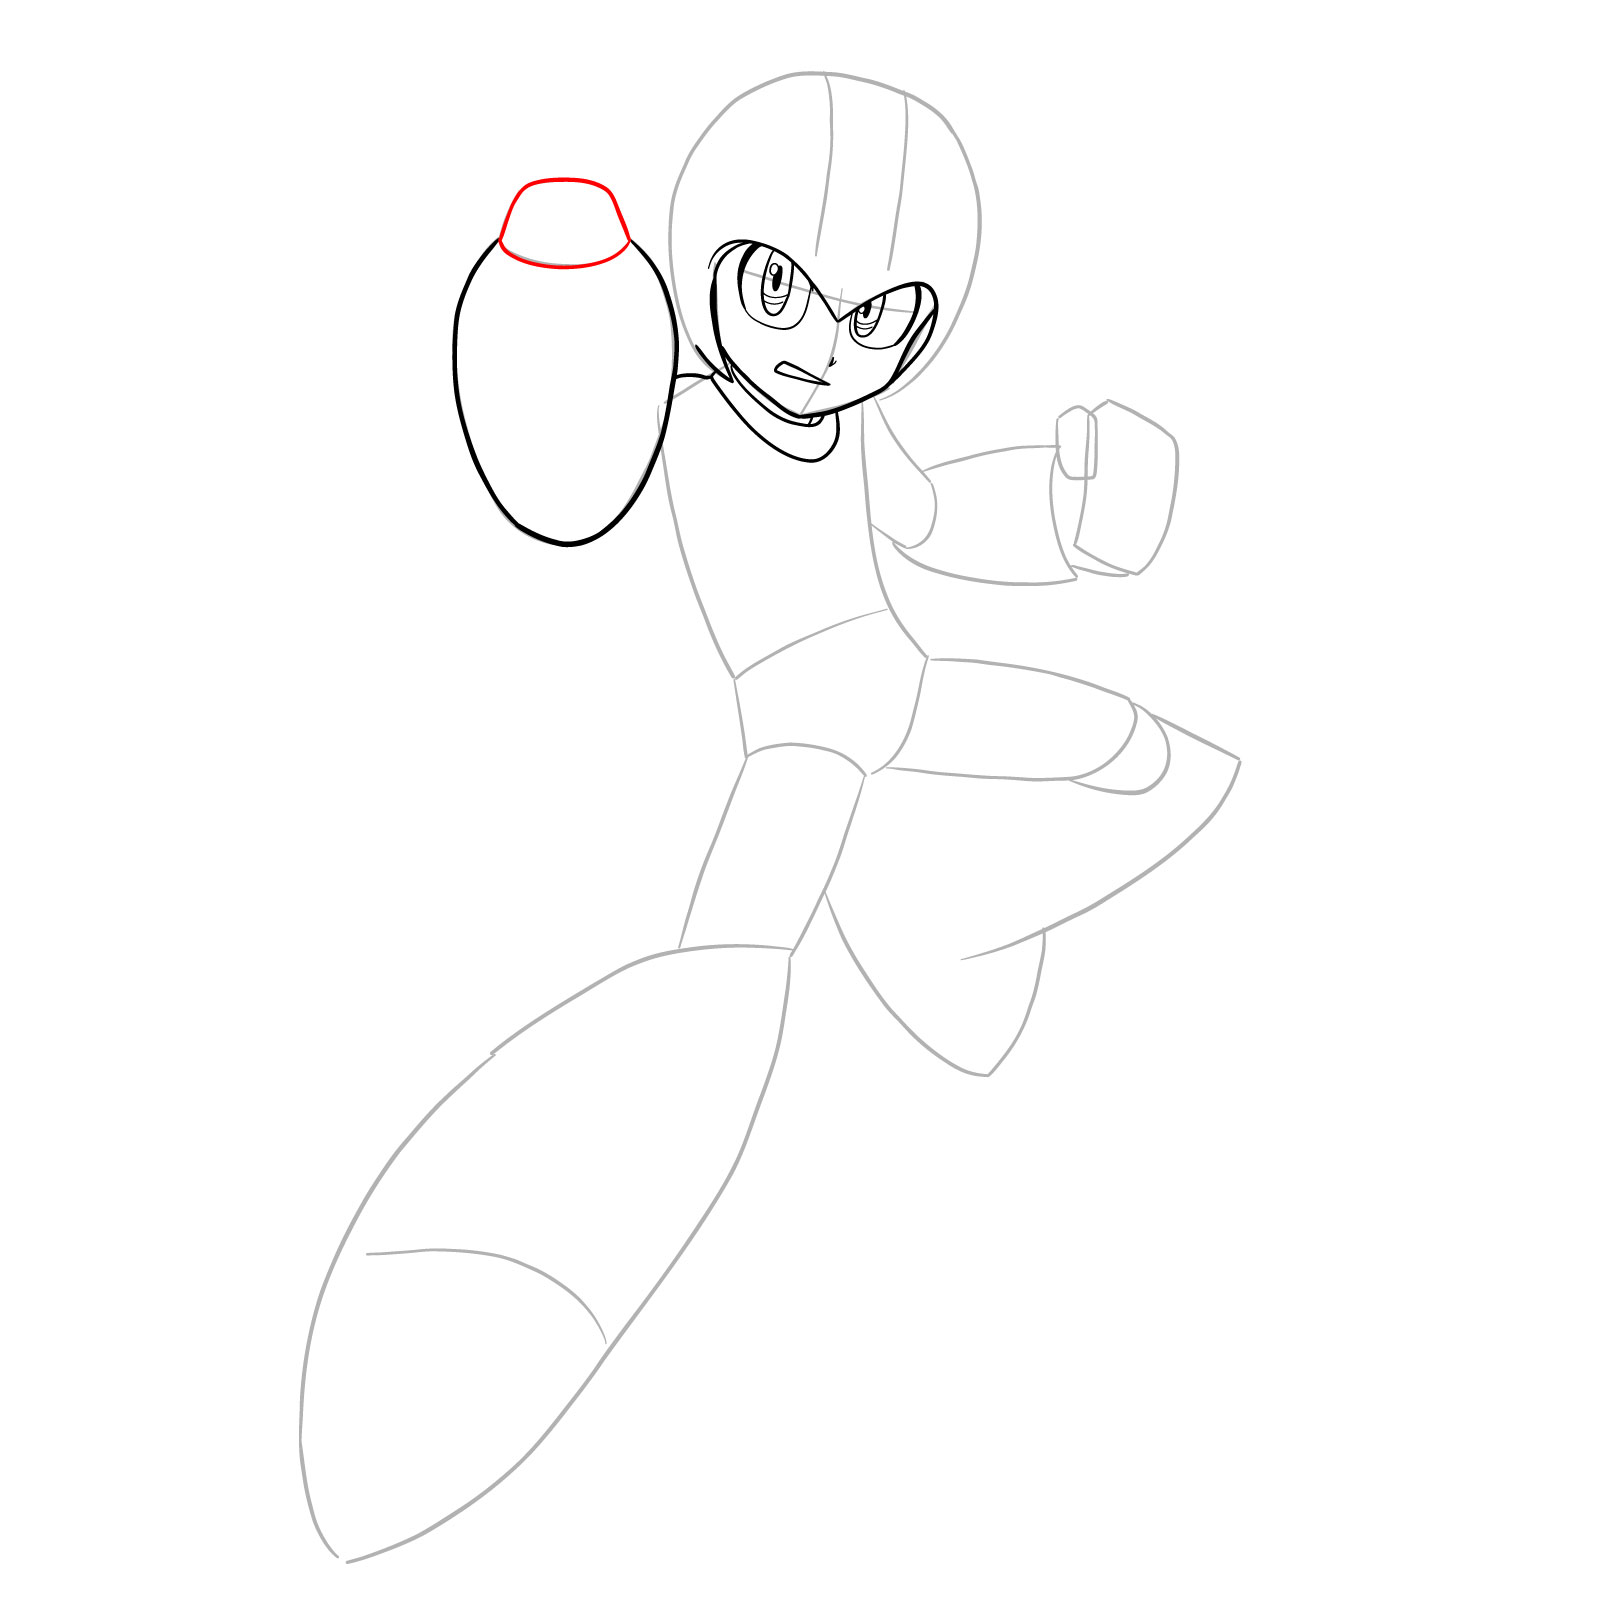 How to draw Mega Man from the 11th game - step 11